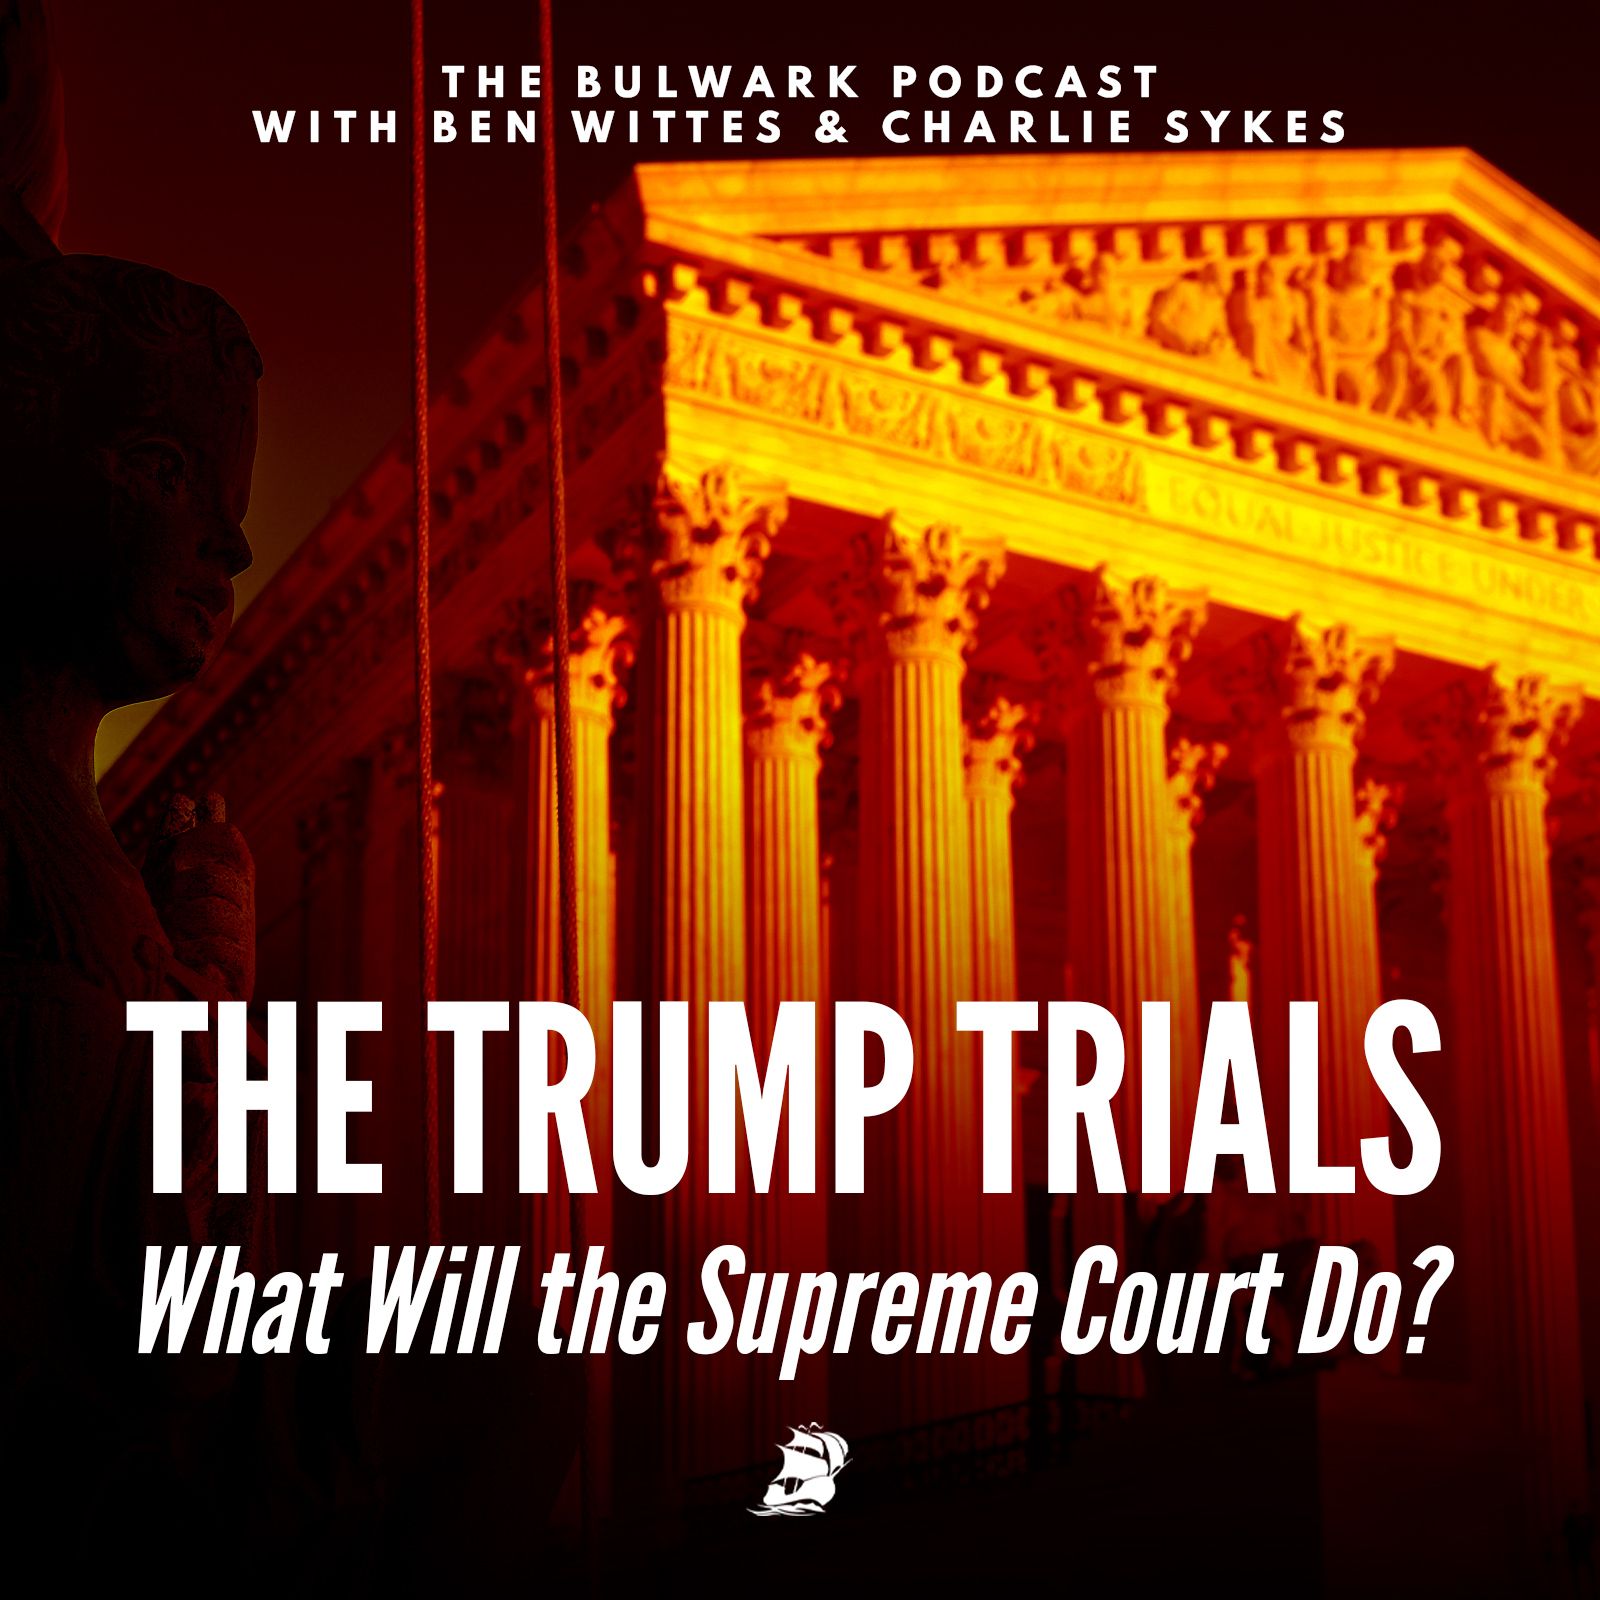 What Will the Supreme Court Do?